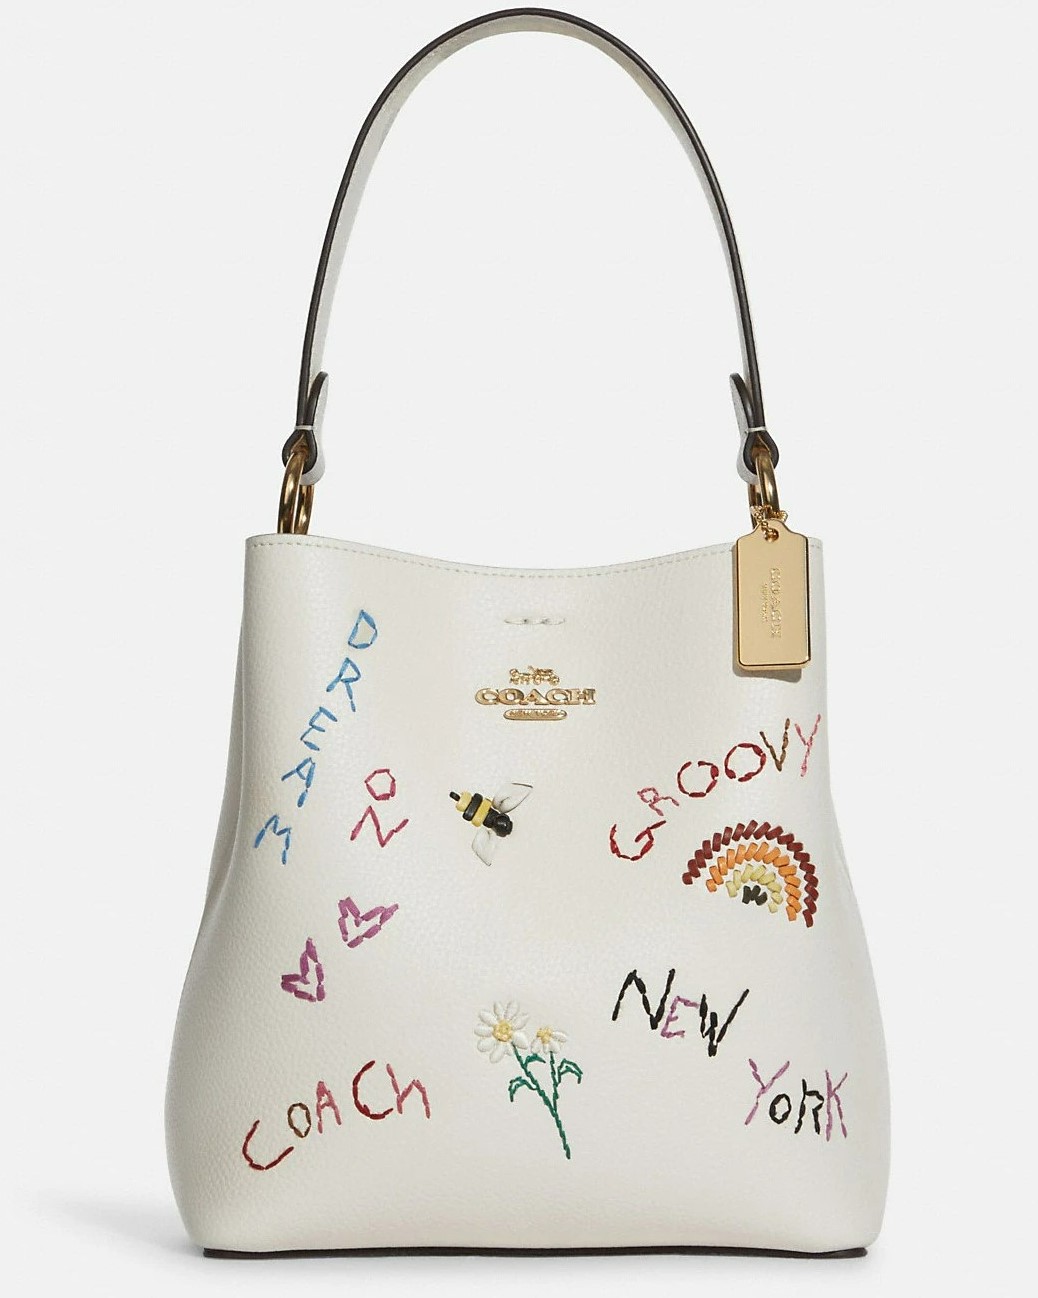 TÚI COACH SMALL TOWN BUCKET BAG WITH DIARY EMBROIDERY 7